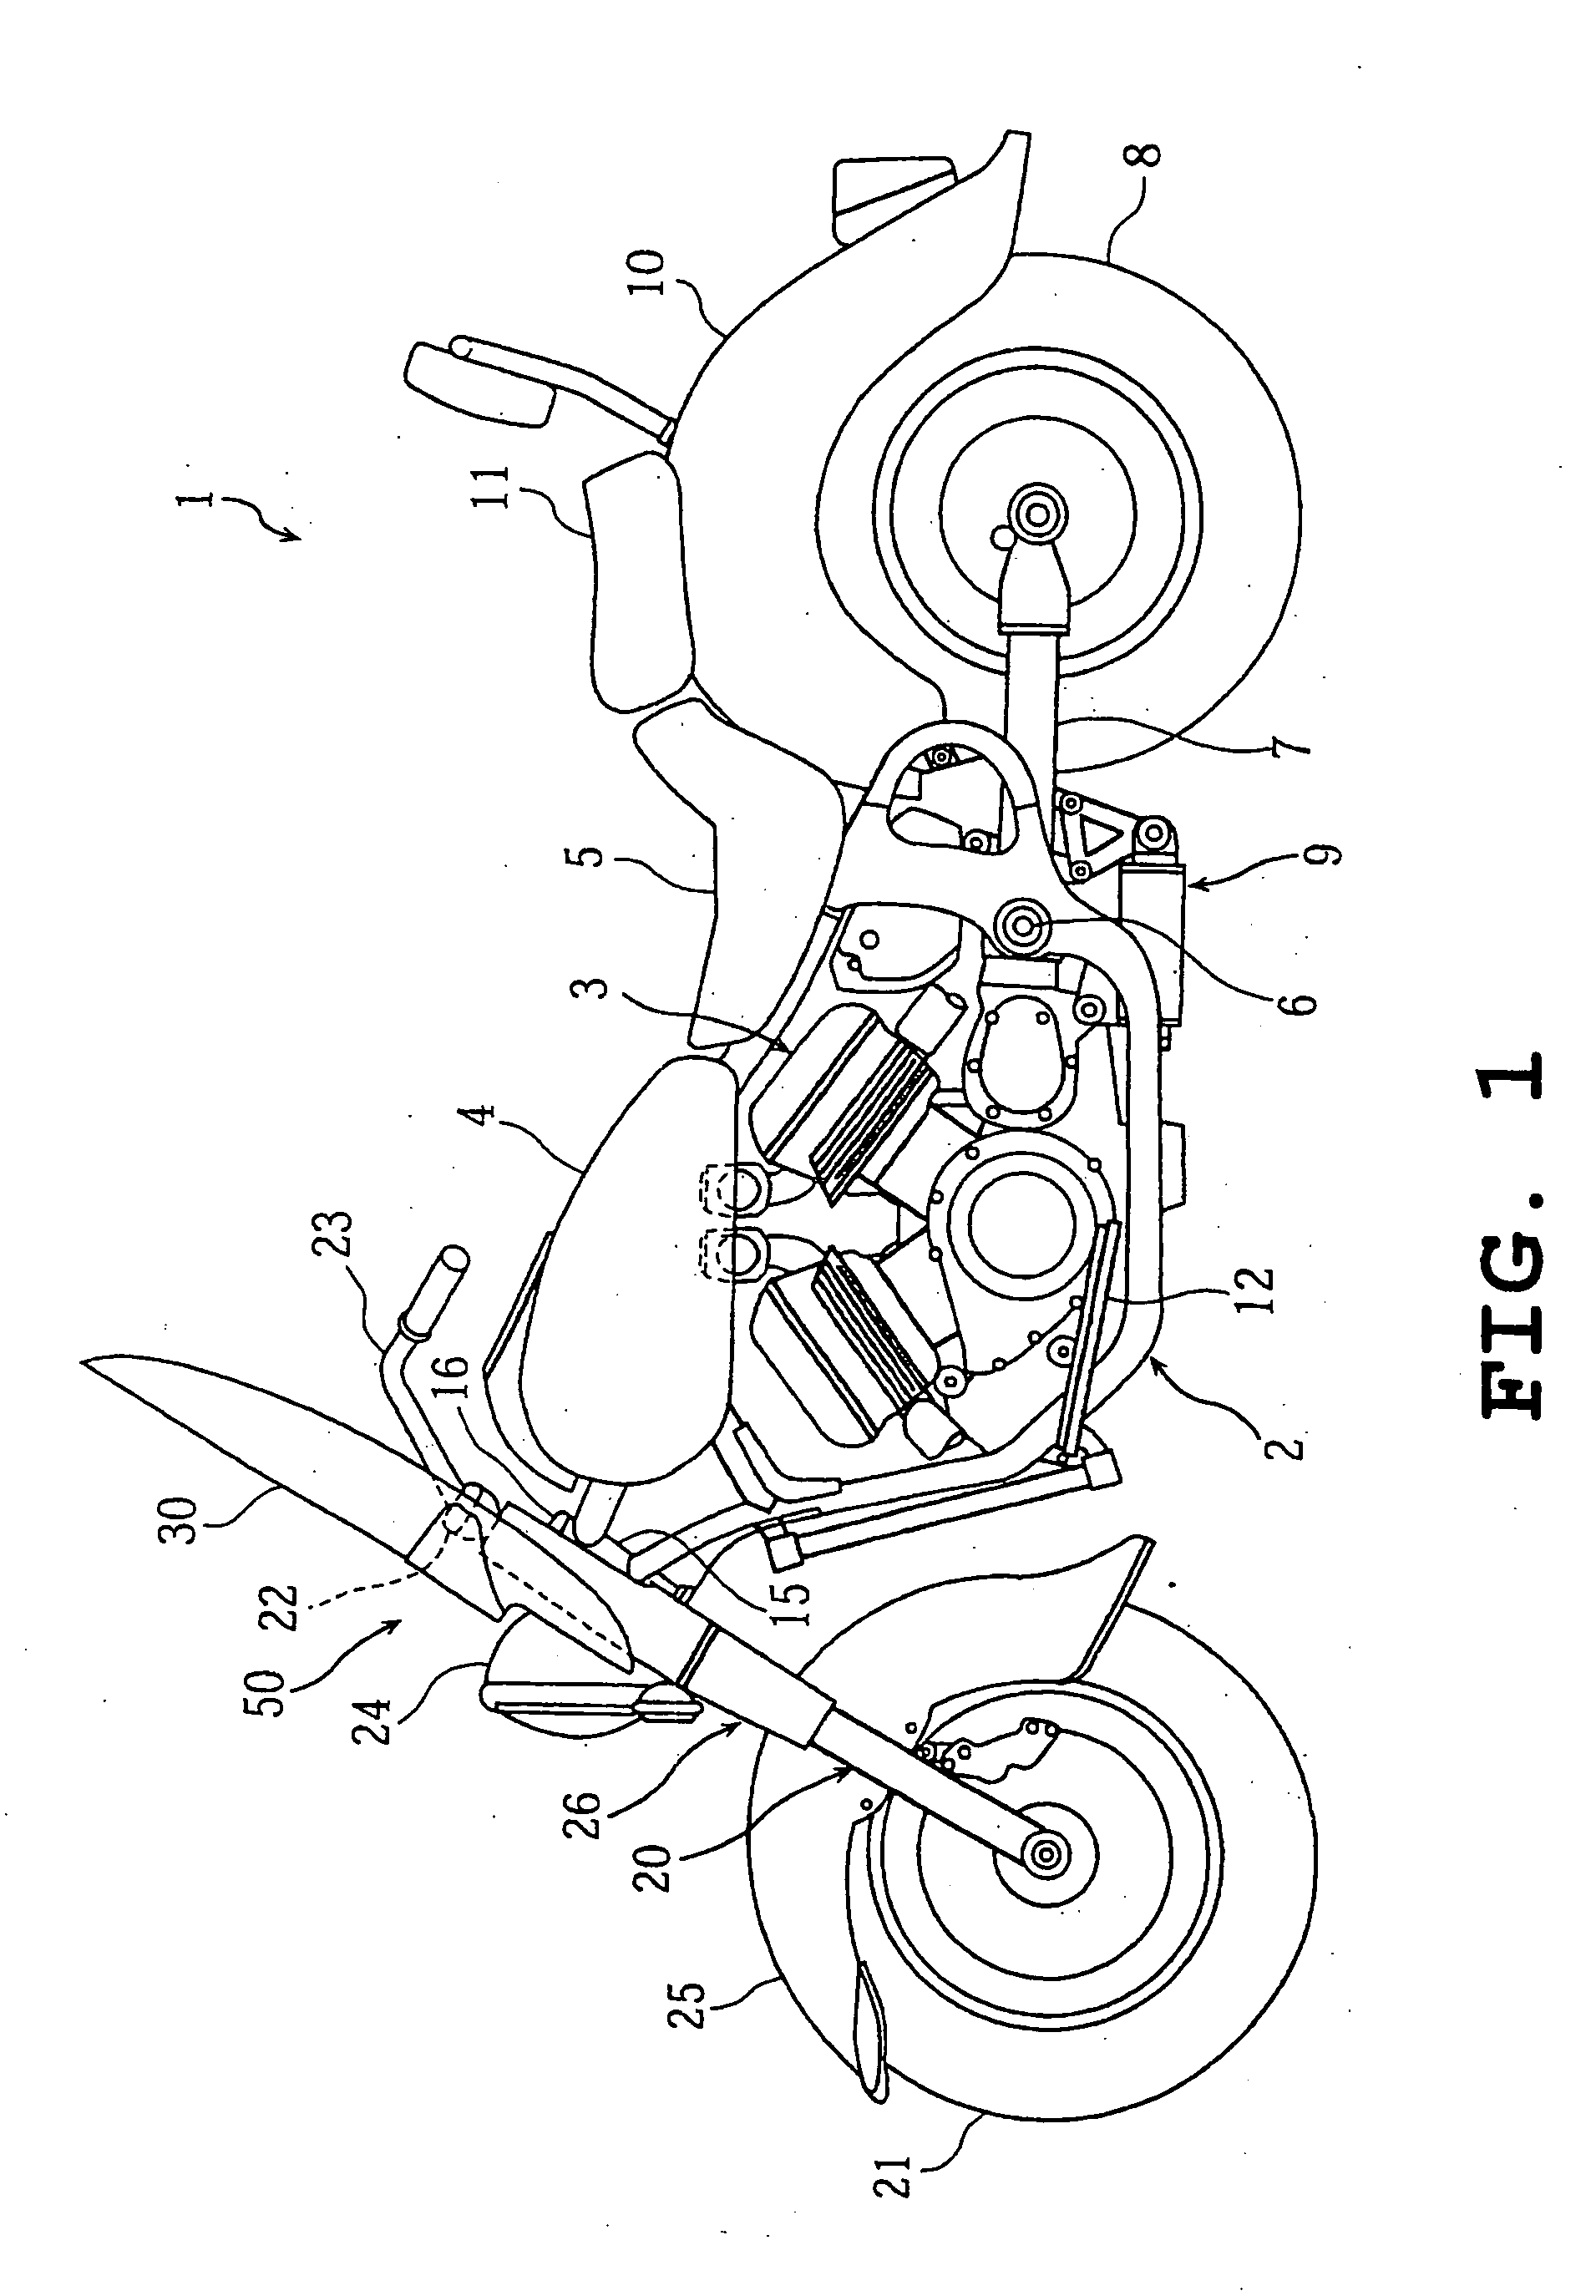 Windscreen device for motorcycle